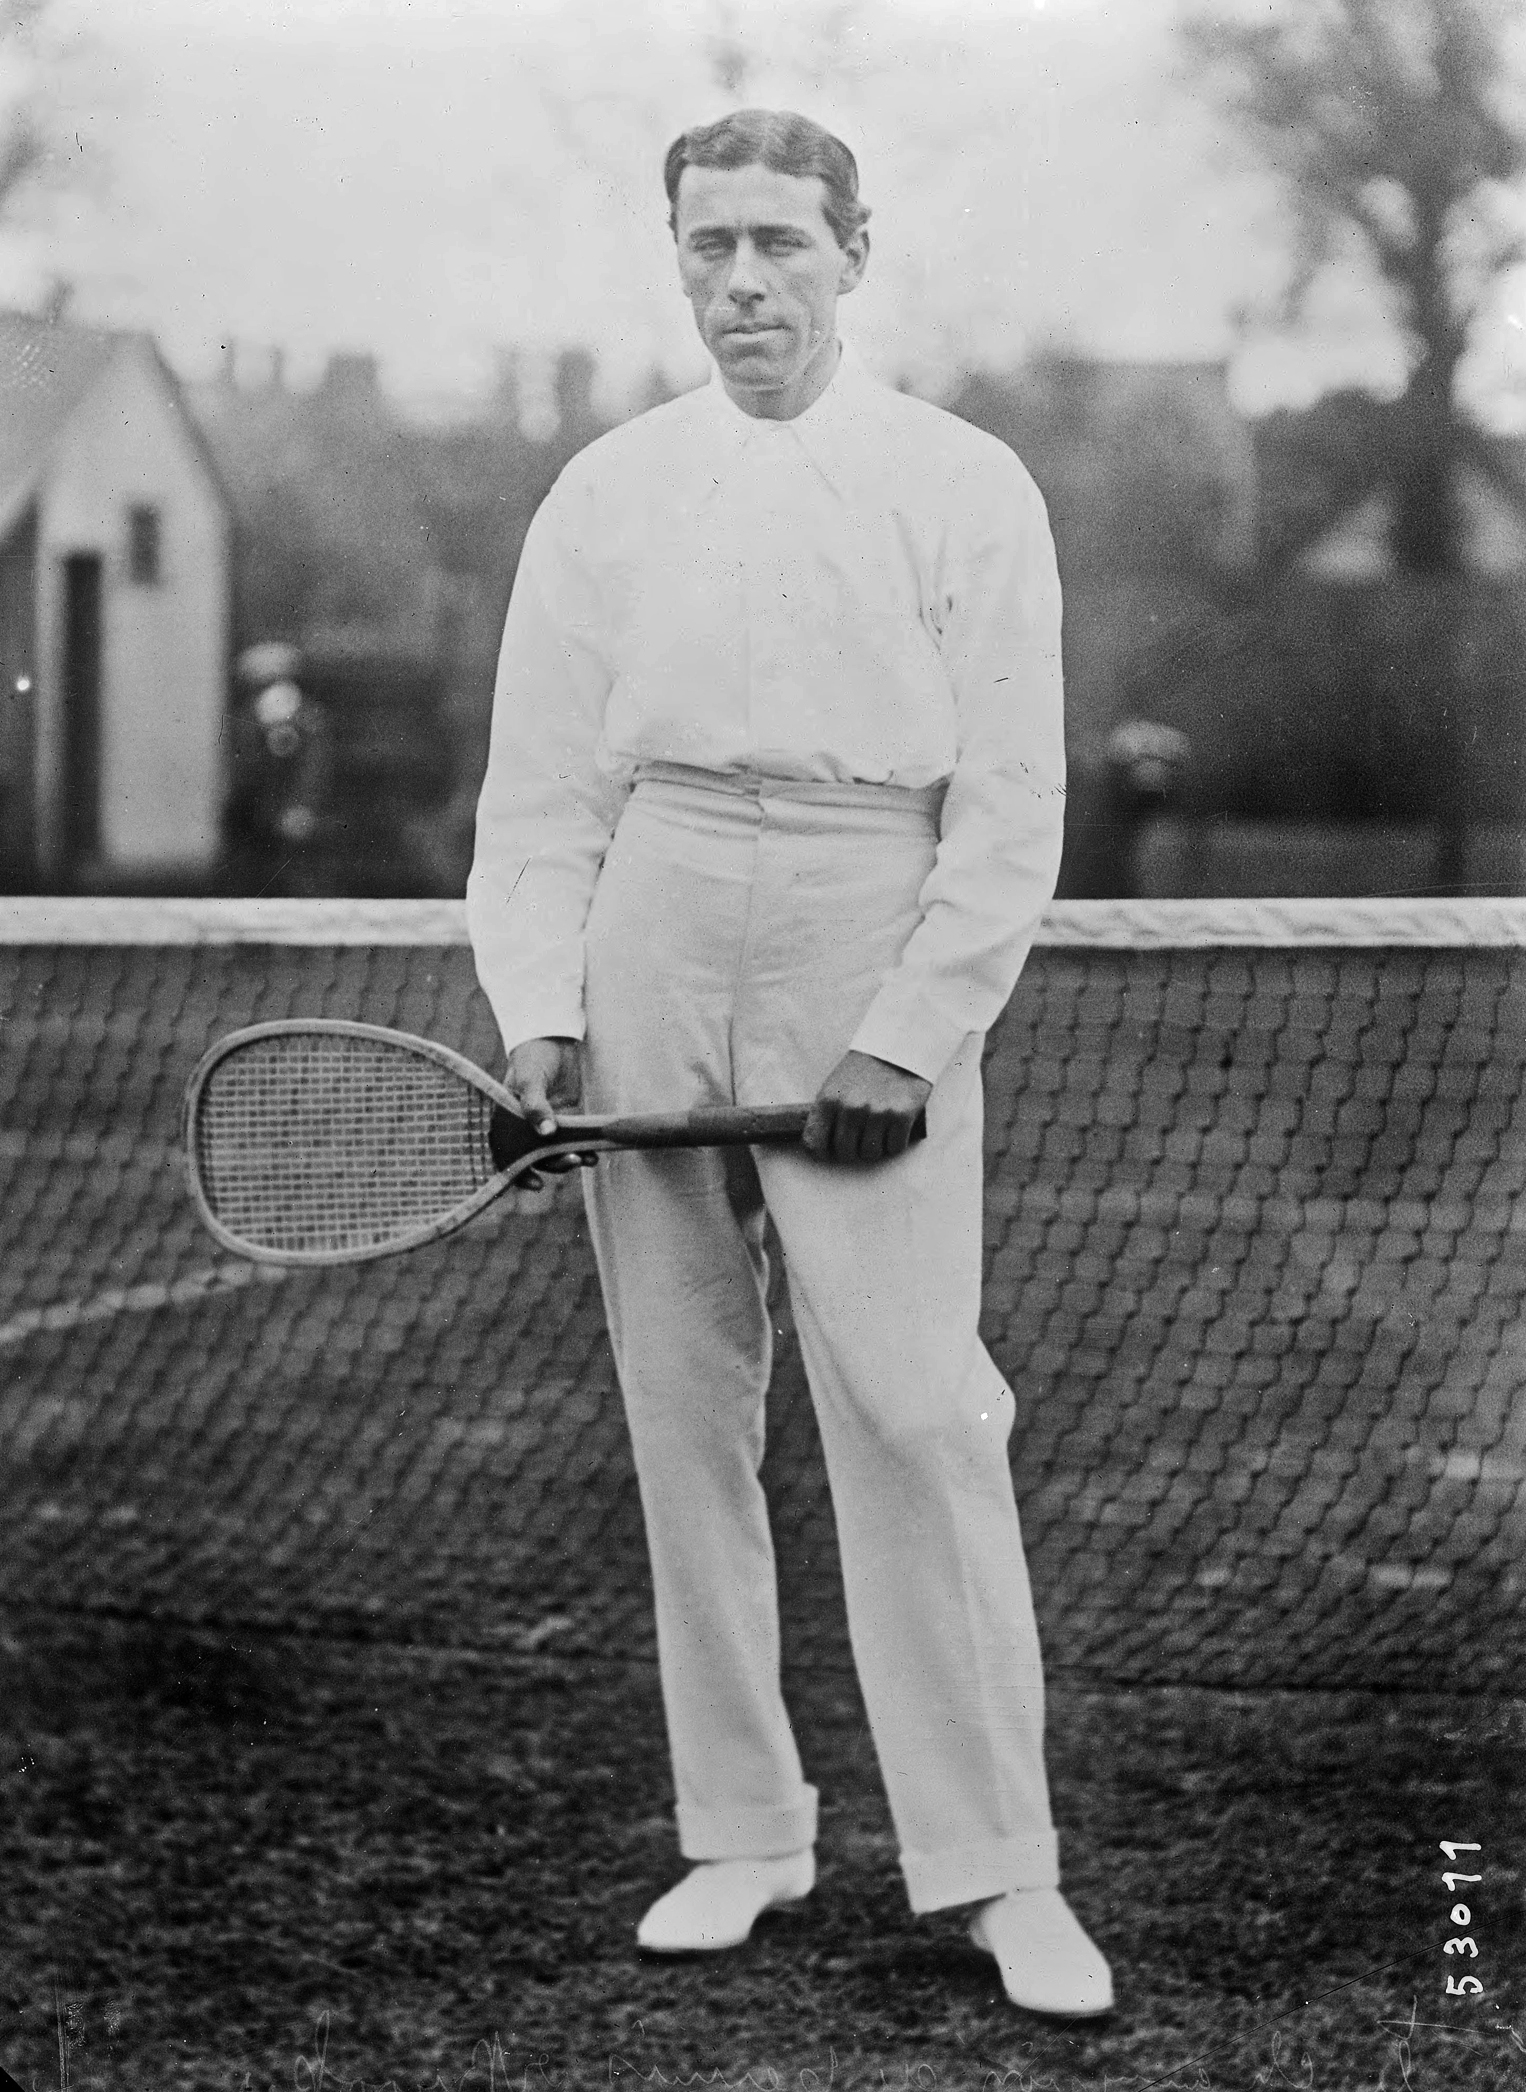 Sir Norman Brookes, namesake of the Norman Brookes Challenge Cup, in 1919. Photo: Bibliothèque nationale de France